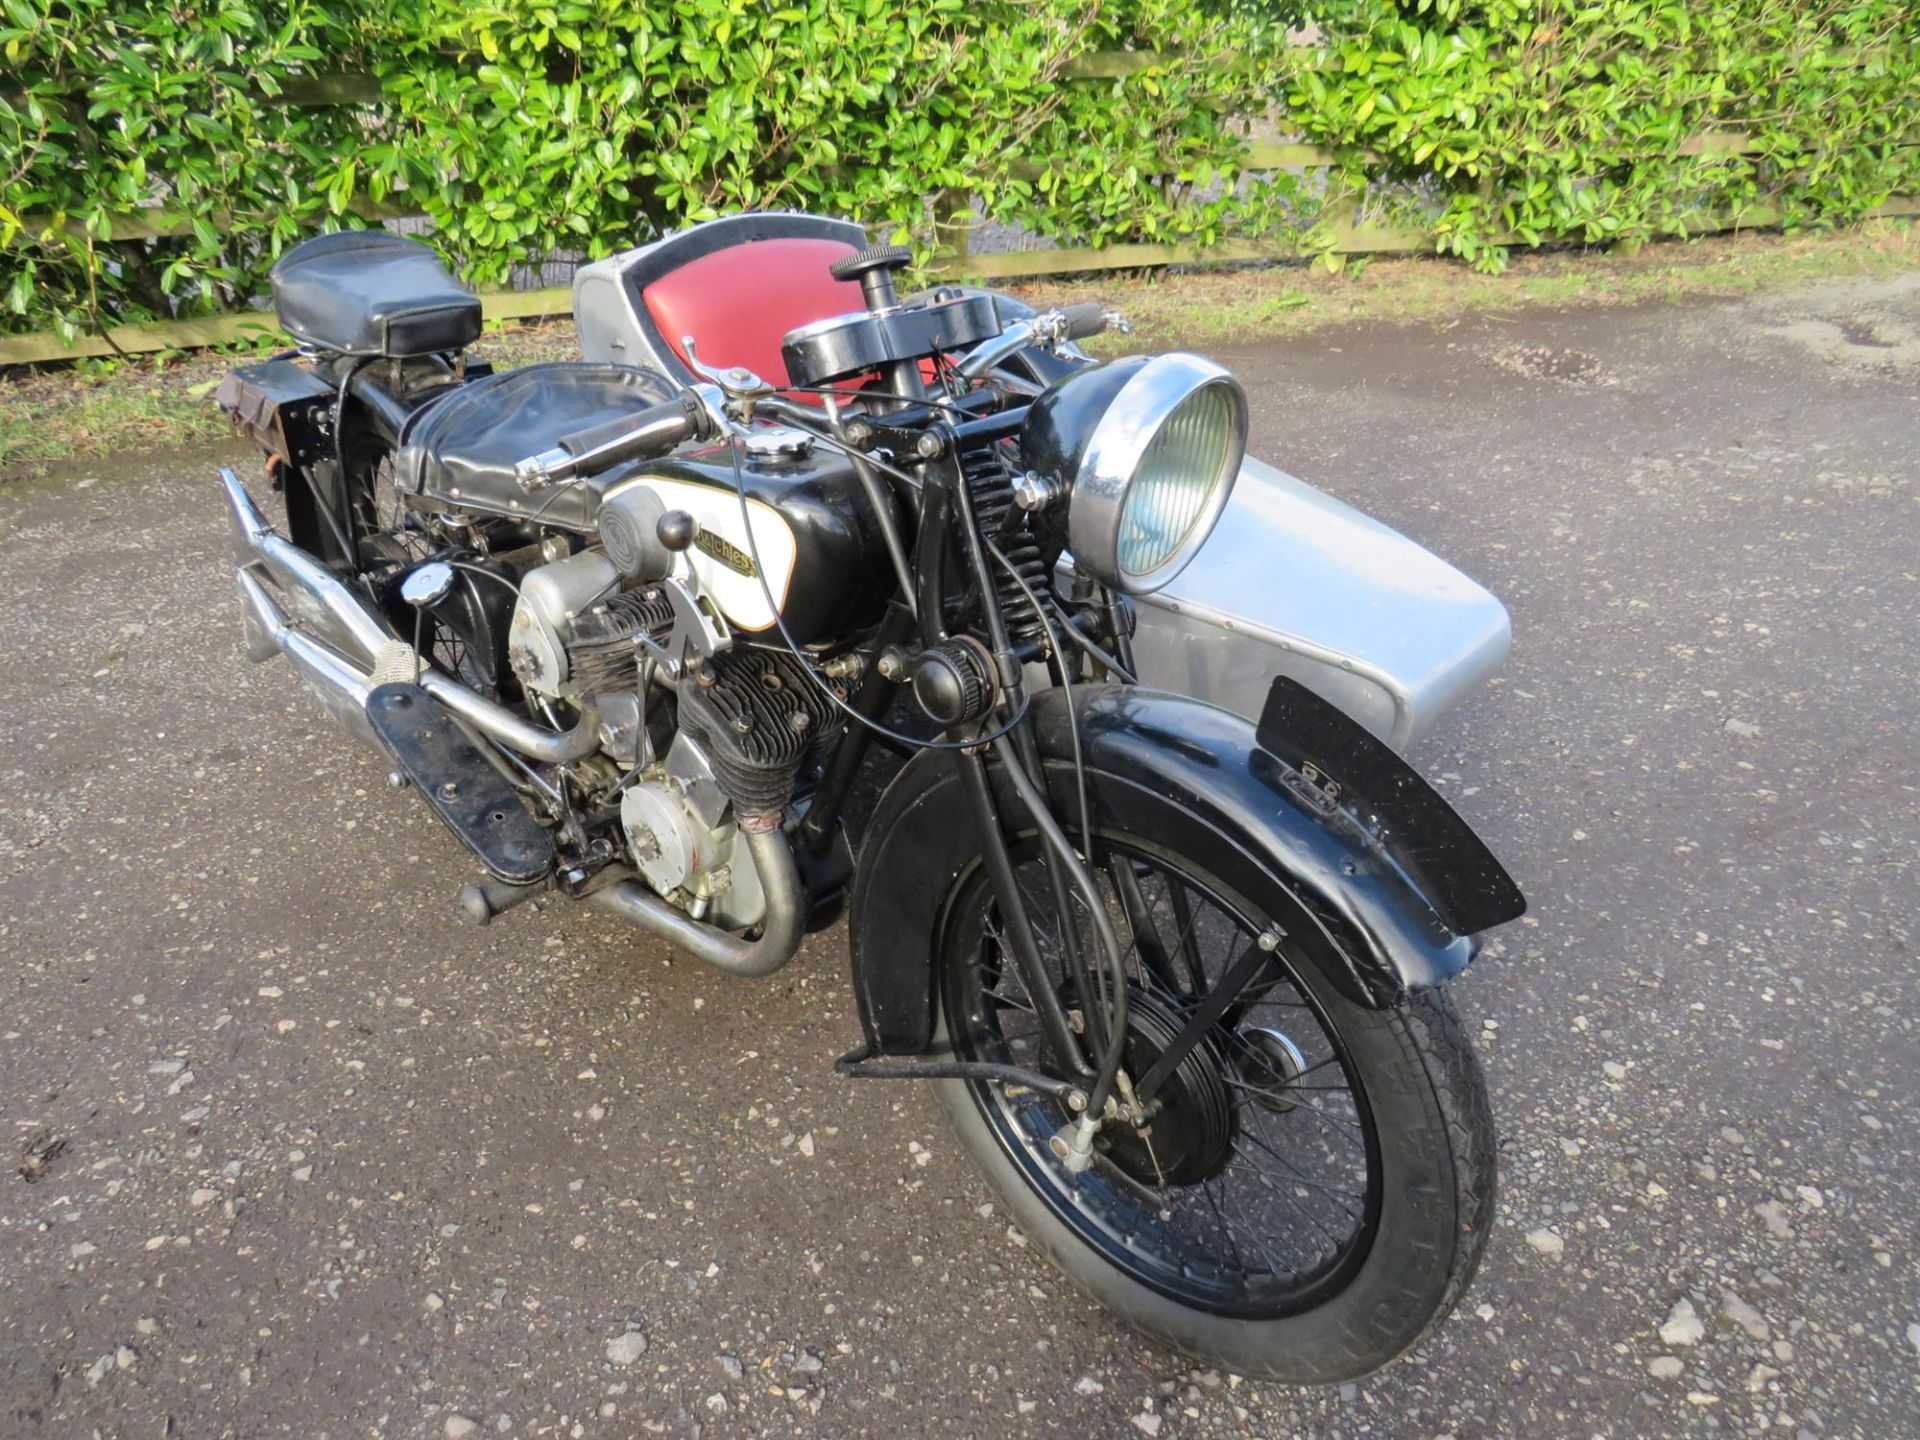 1929 Matchless Model X/2 Sidecar Outfit 996cc - Image 6 of 10